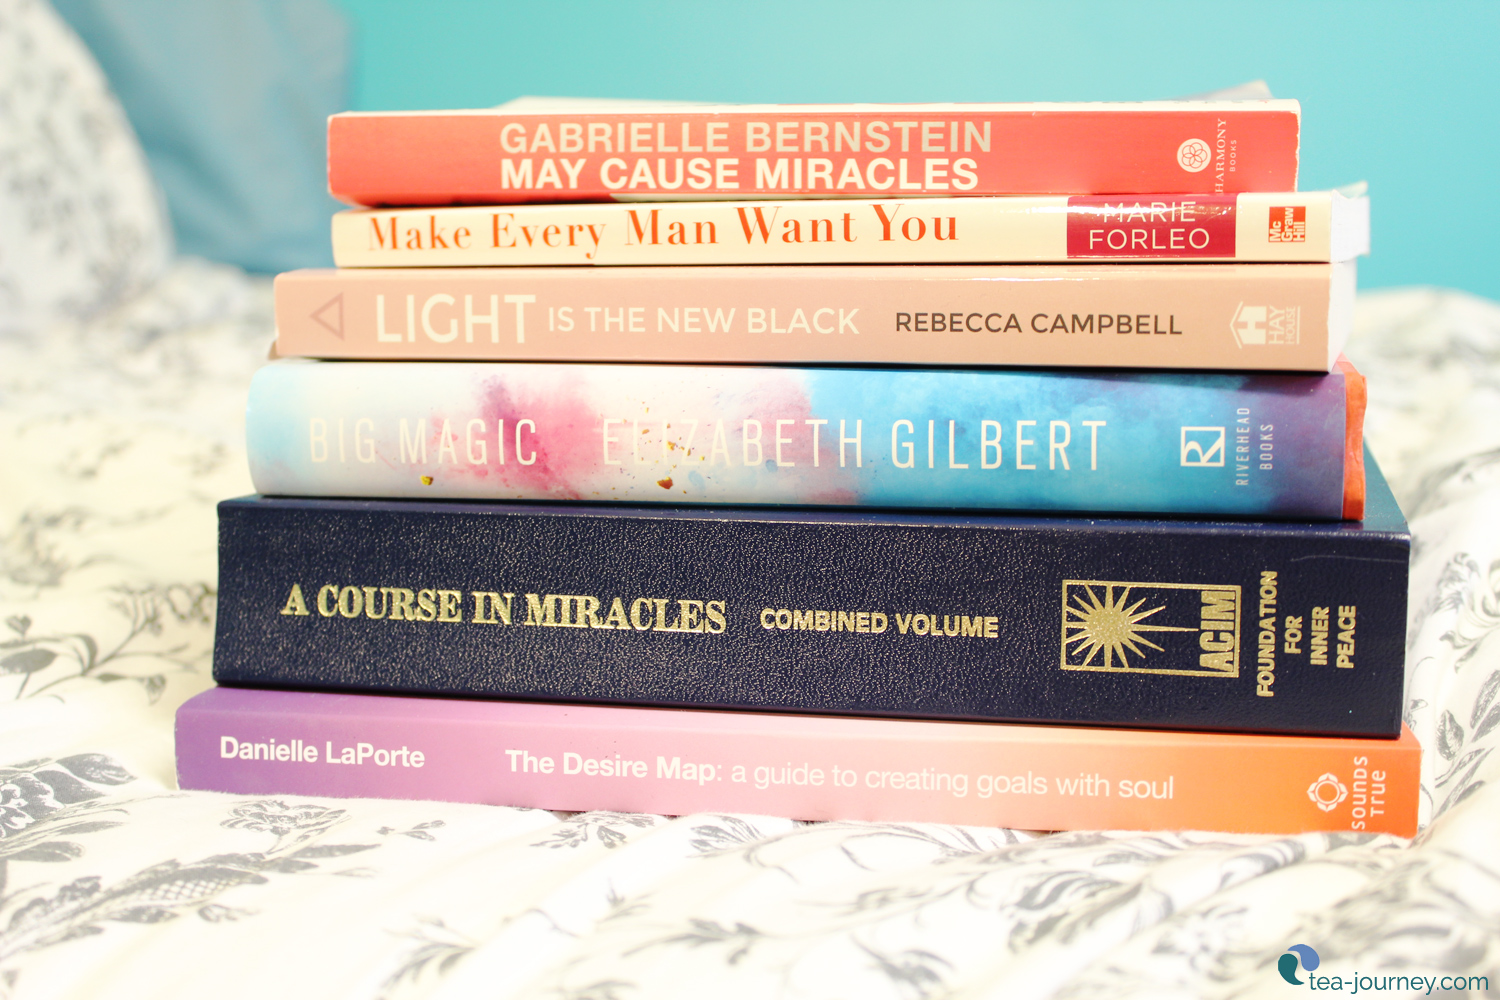 Unplugged: 6 Self-help Books for Spiritually Present Life ||  Books to get you spiritually focused on the present today. Be present for your tea, life, or just because you are the Spirit Junkie that you are. Rock your world. || Gabrielle Bernstein - May Cause Miracles, Marie Forleo - Make Every Man Want You, Rebecca Campbell - Light is the New Black, Elizabeth Gilbert - Big Magic, A Course in Miracles, Danielle LaPorte - The Desire Map ||